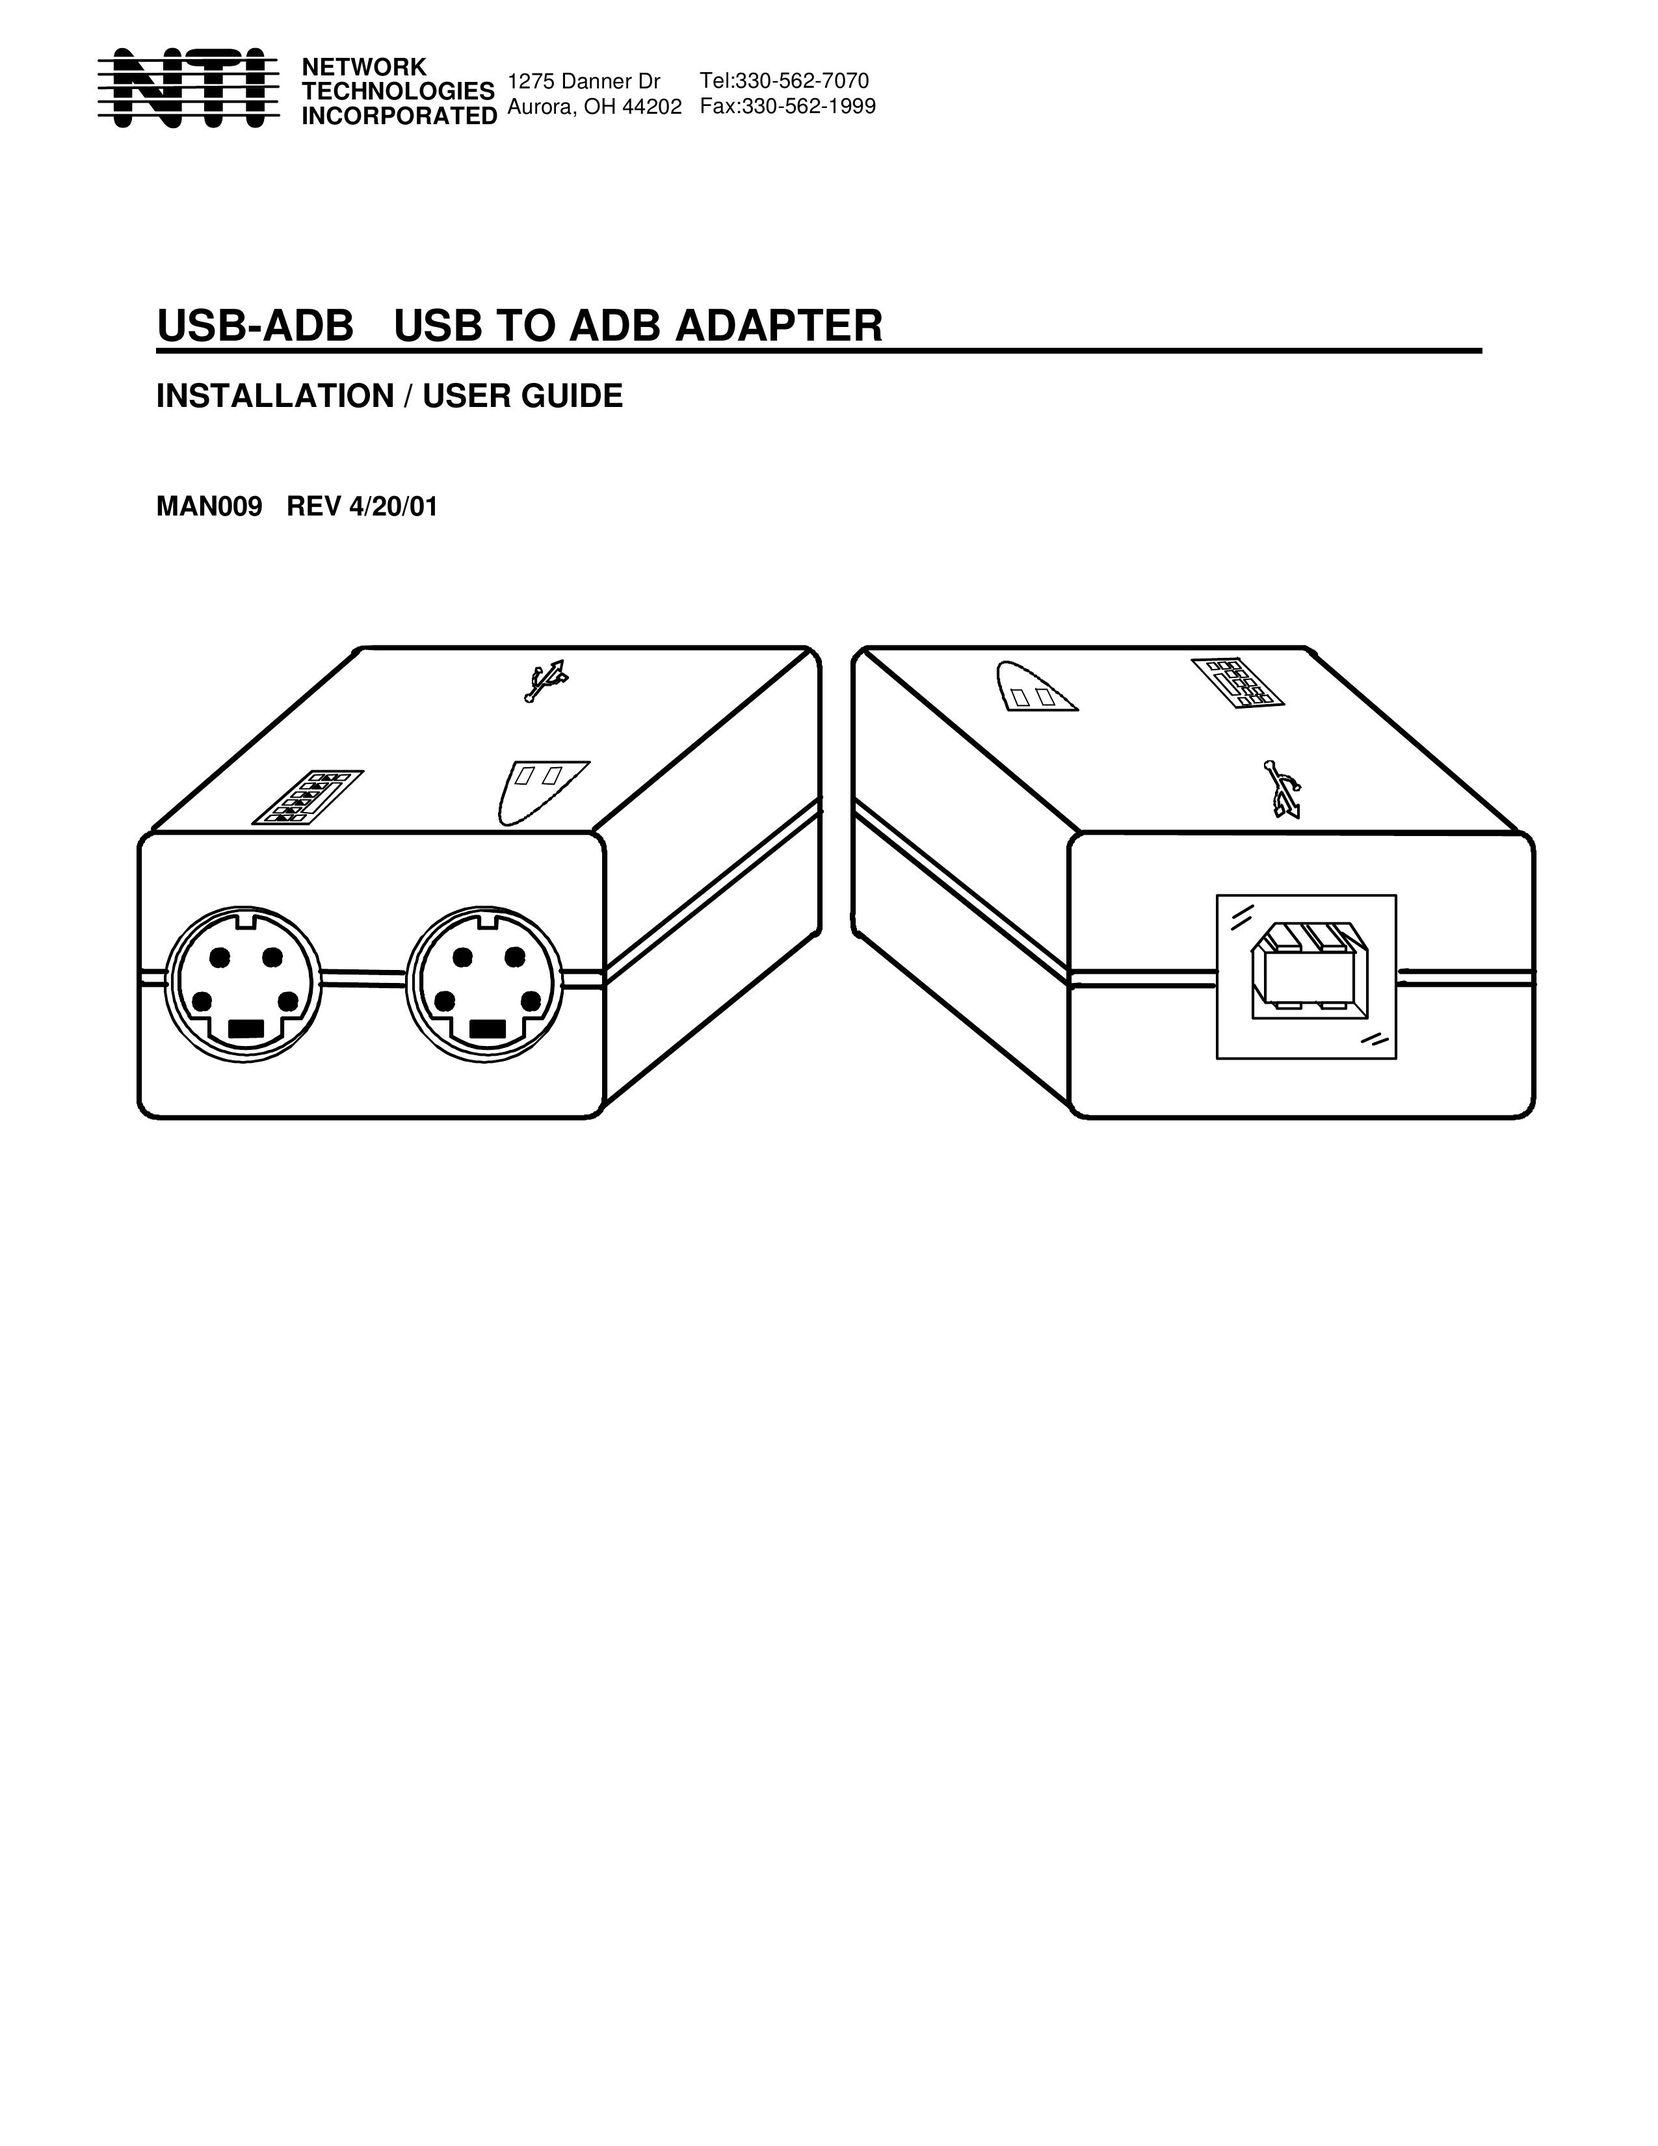 Network Technologies MAN009 Network Cables User Manual